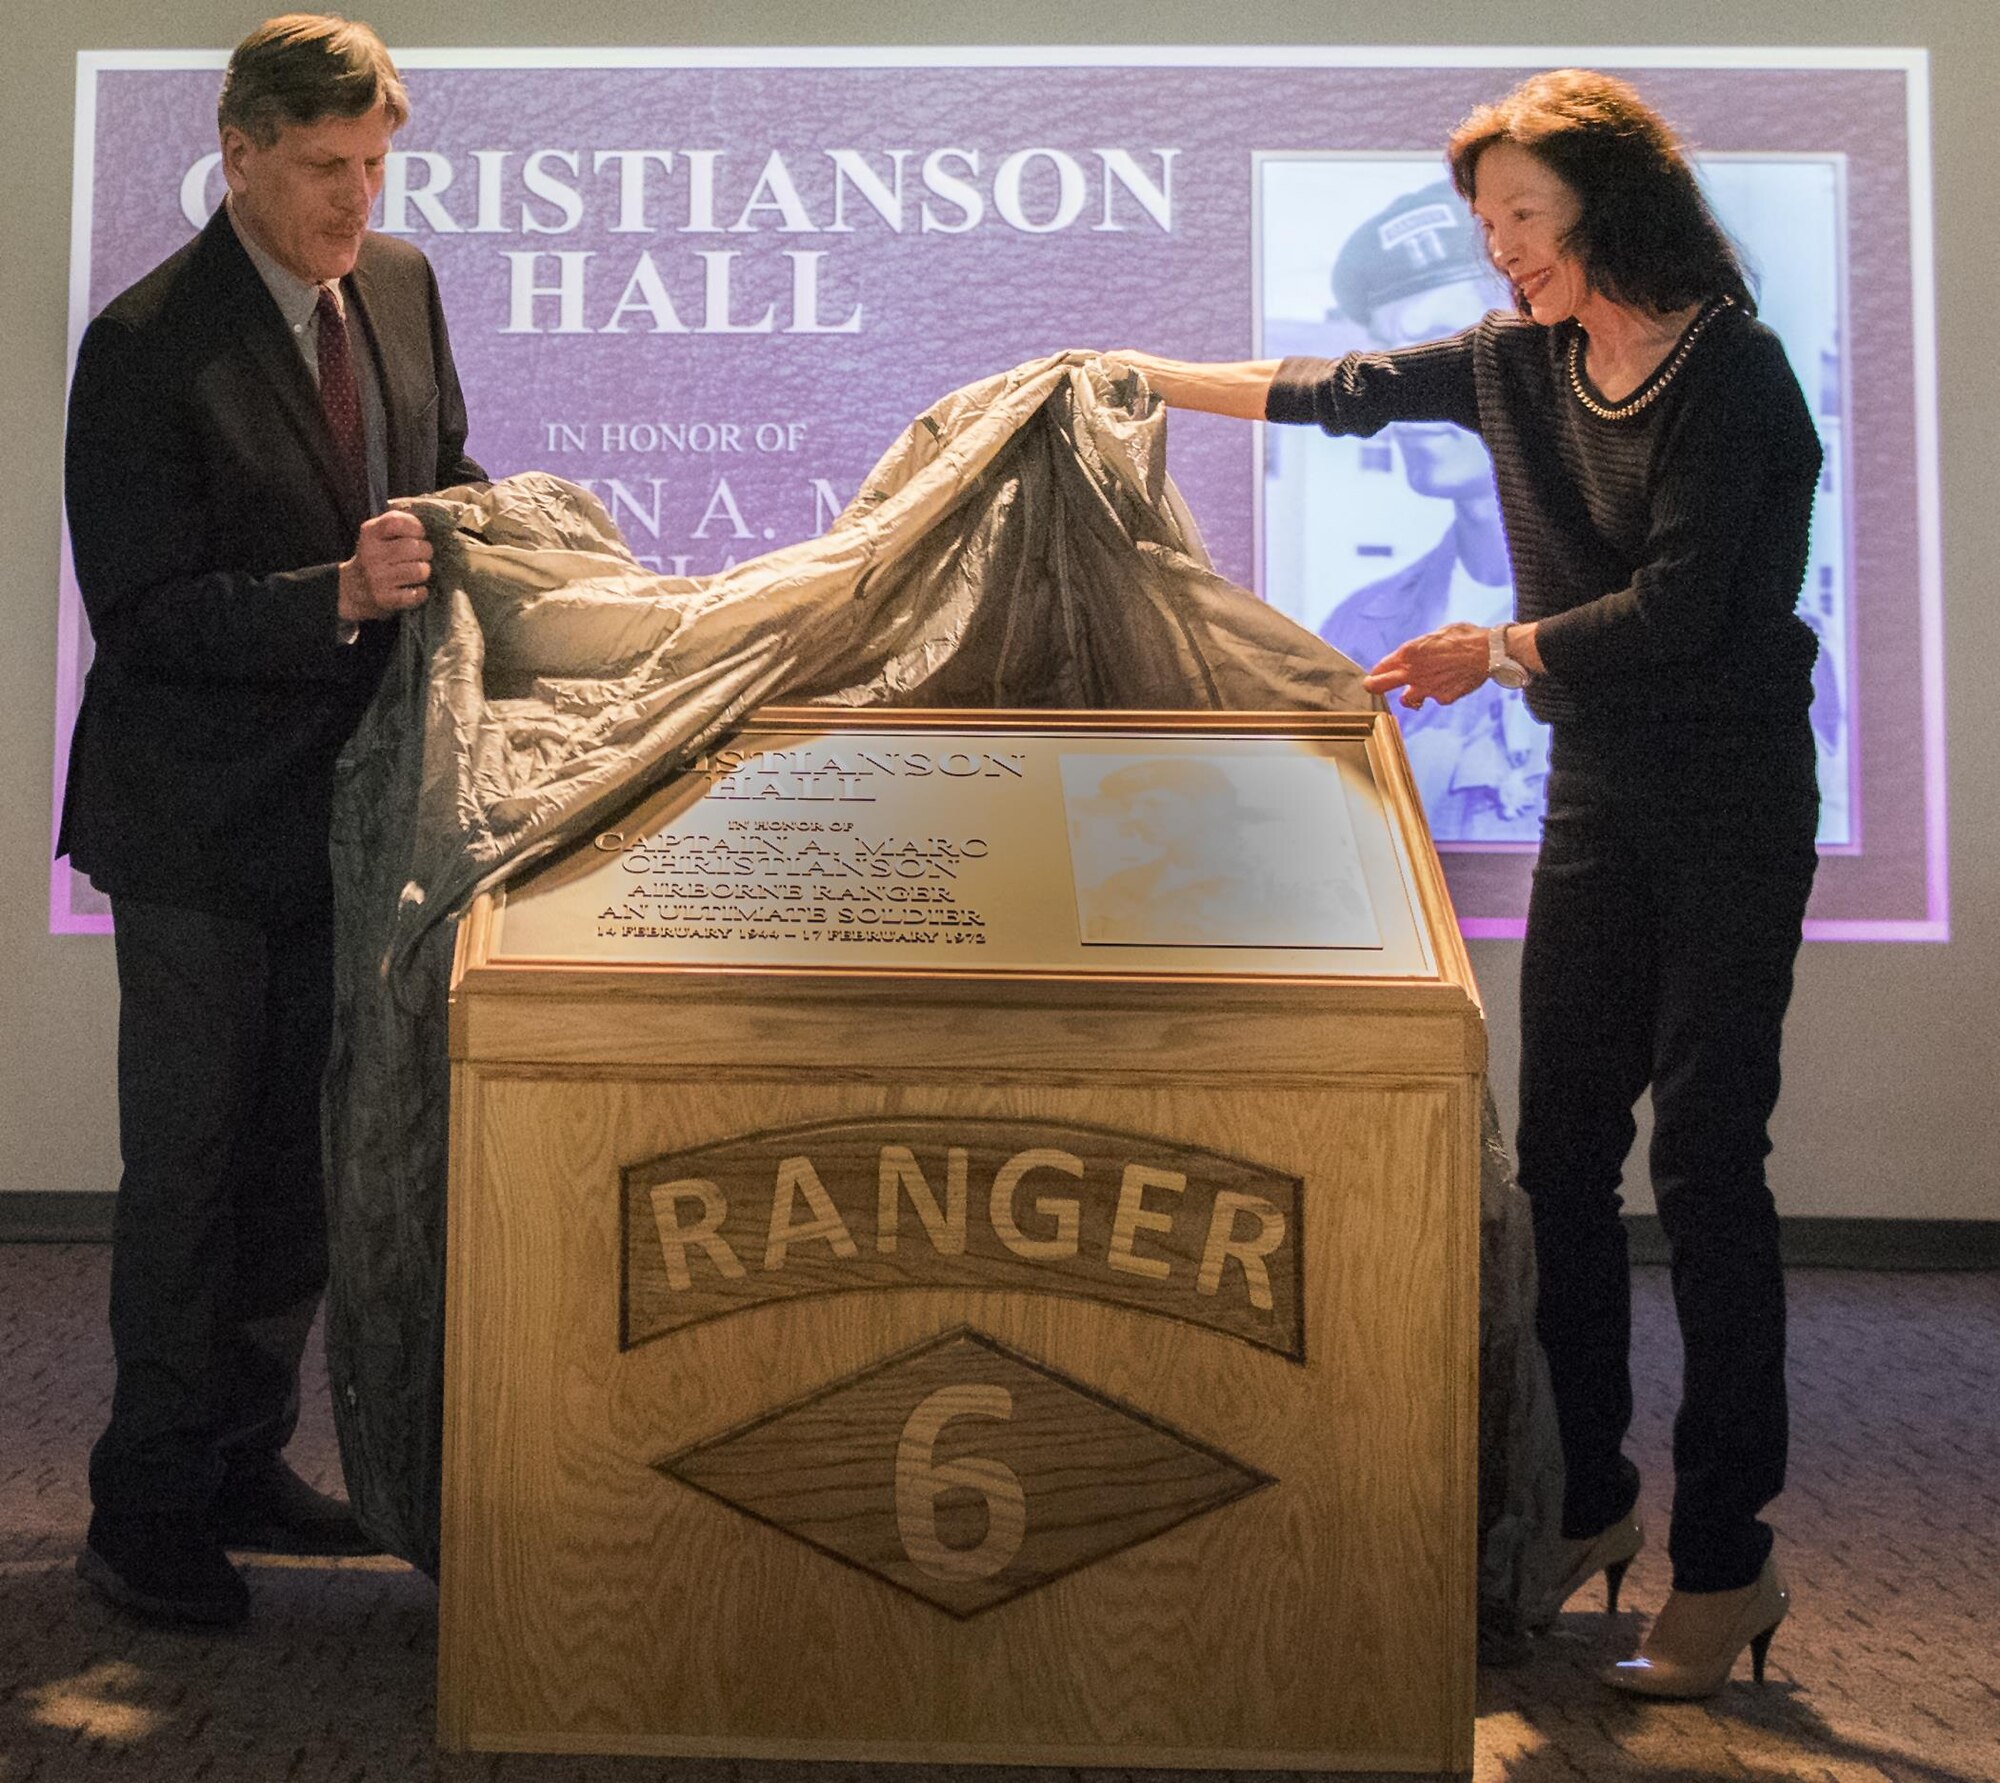 Jim and Dr. Betsy Christianson unveil the plaque for Capt. A. Marc Christianson III during the 6th Ranger Training Battalion’s headquarters building dedication ceremony March 17 at Eglin Air Force Base, Fla.  The building was dedicated to Christianson, who passed away on the training range in 1972.  (U.S. Air Force photo/Samuel King Jr.)